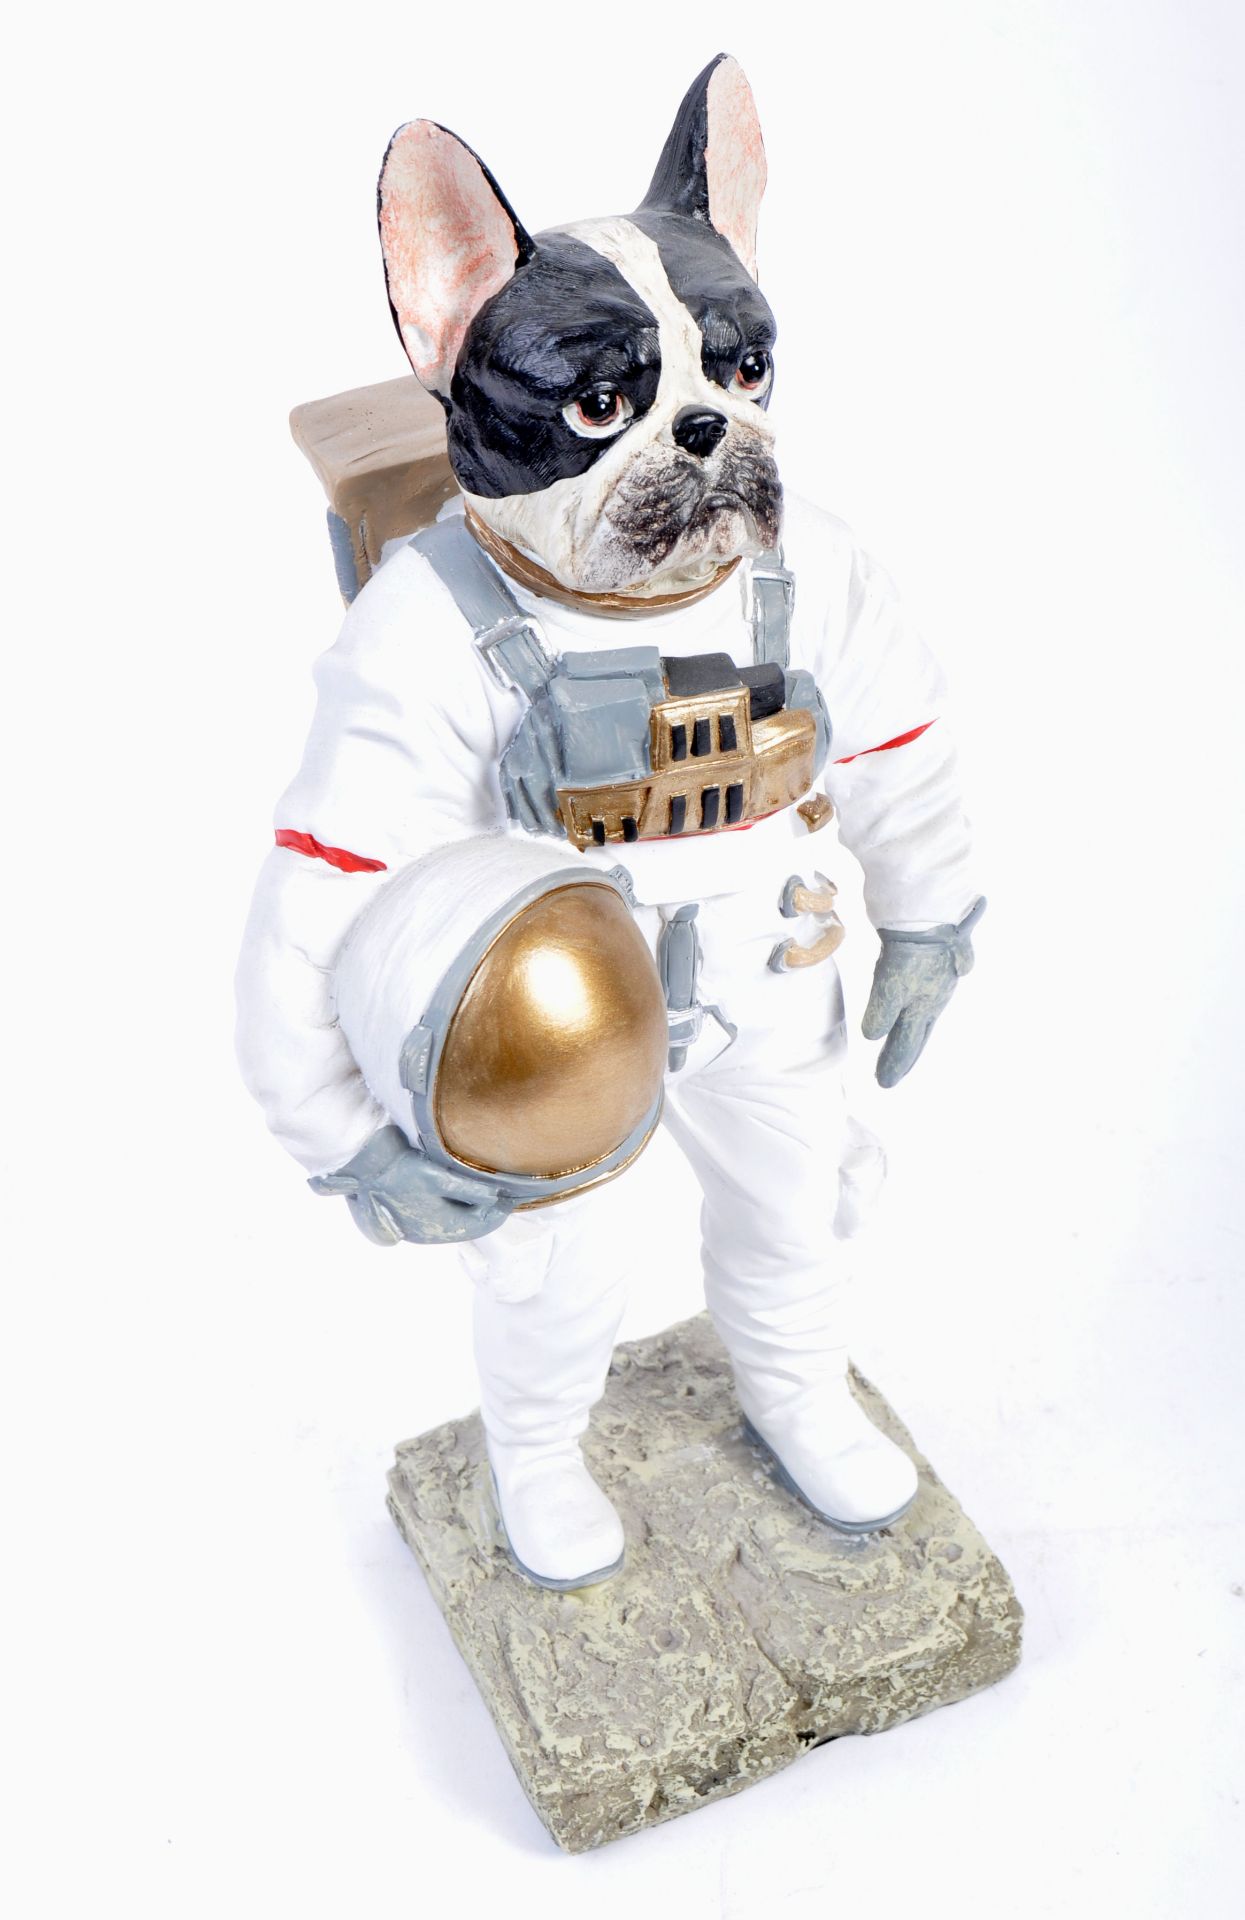 PROMOTIONAL ADVERTISING STATUE / PROP OF A BULL DOG ASTRONAUT - Image 2 of 5